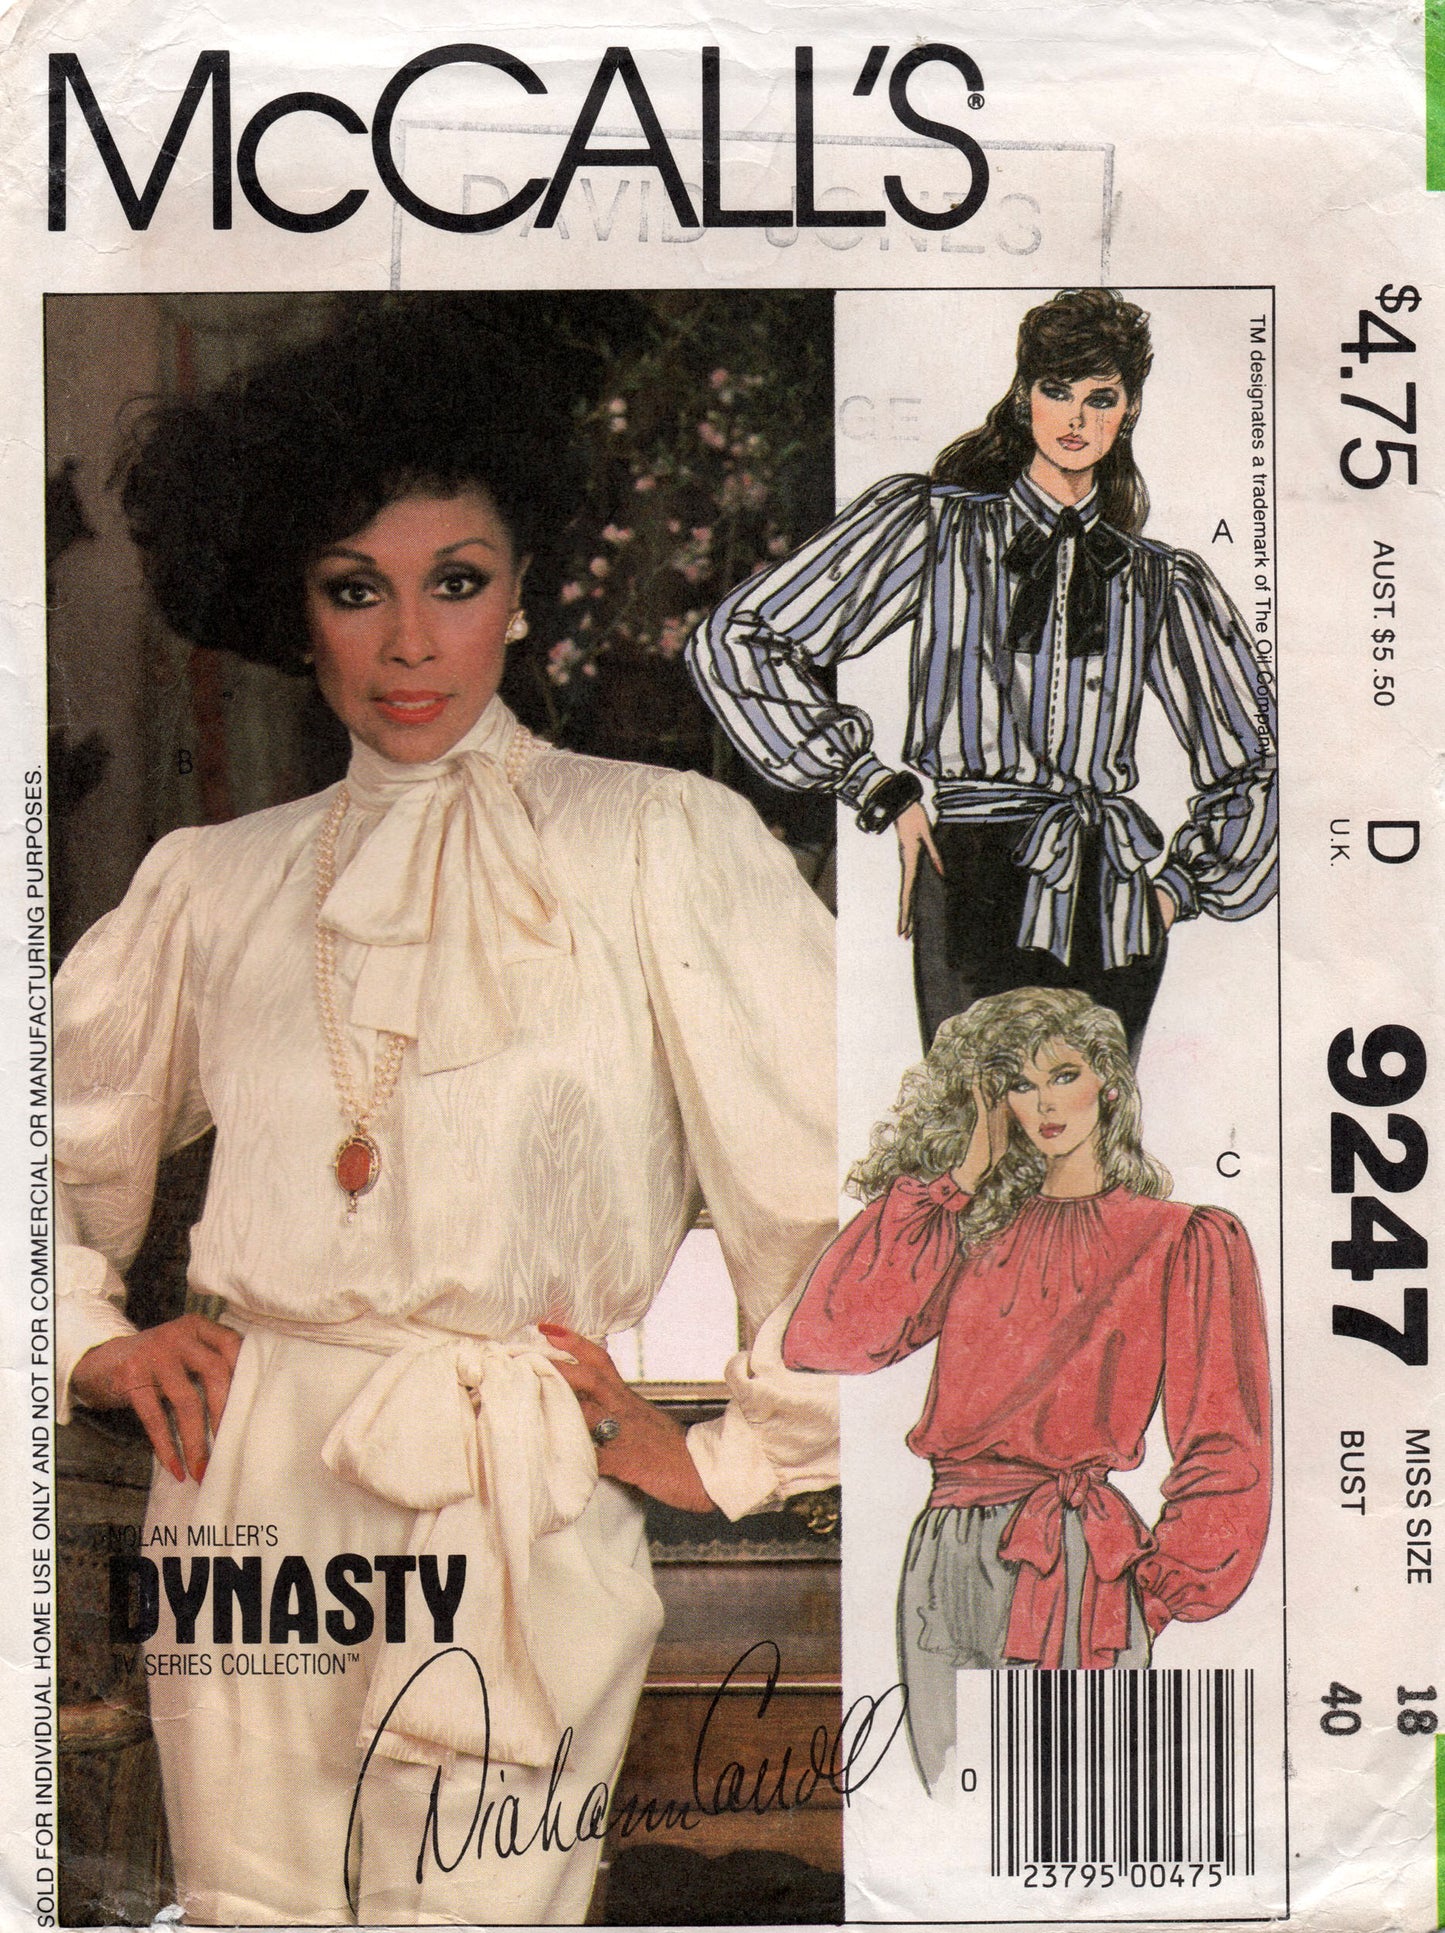 McCall's 9247 Womens DYNASTY Big Sleeved Blouse 1980s Vintage Sewing Pattern Size 18 Bust 40 inches UNCUT Factory Folded